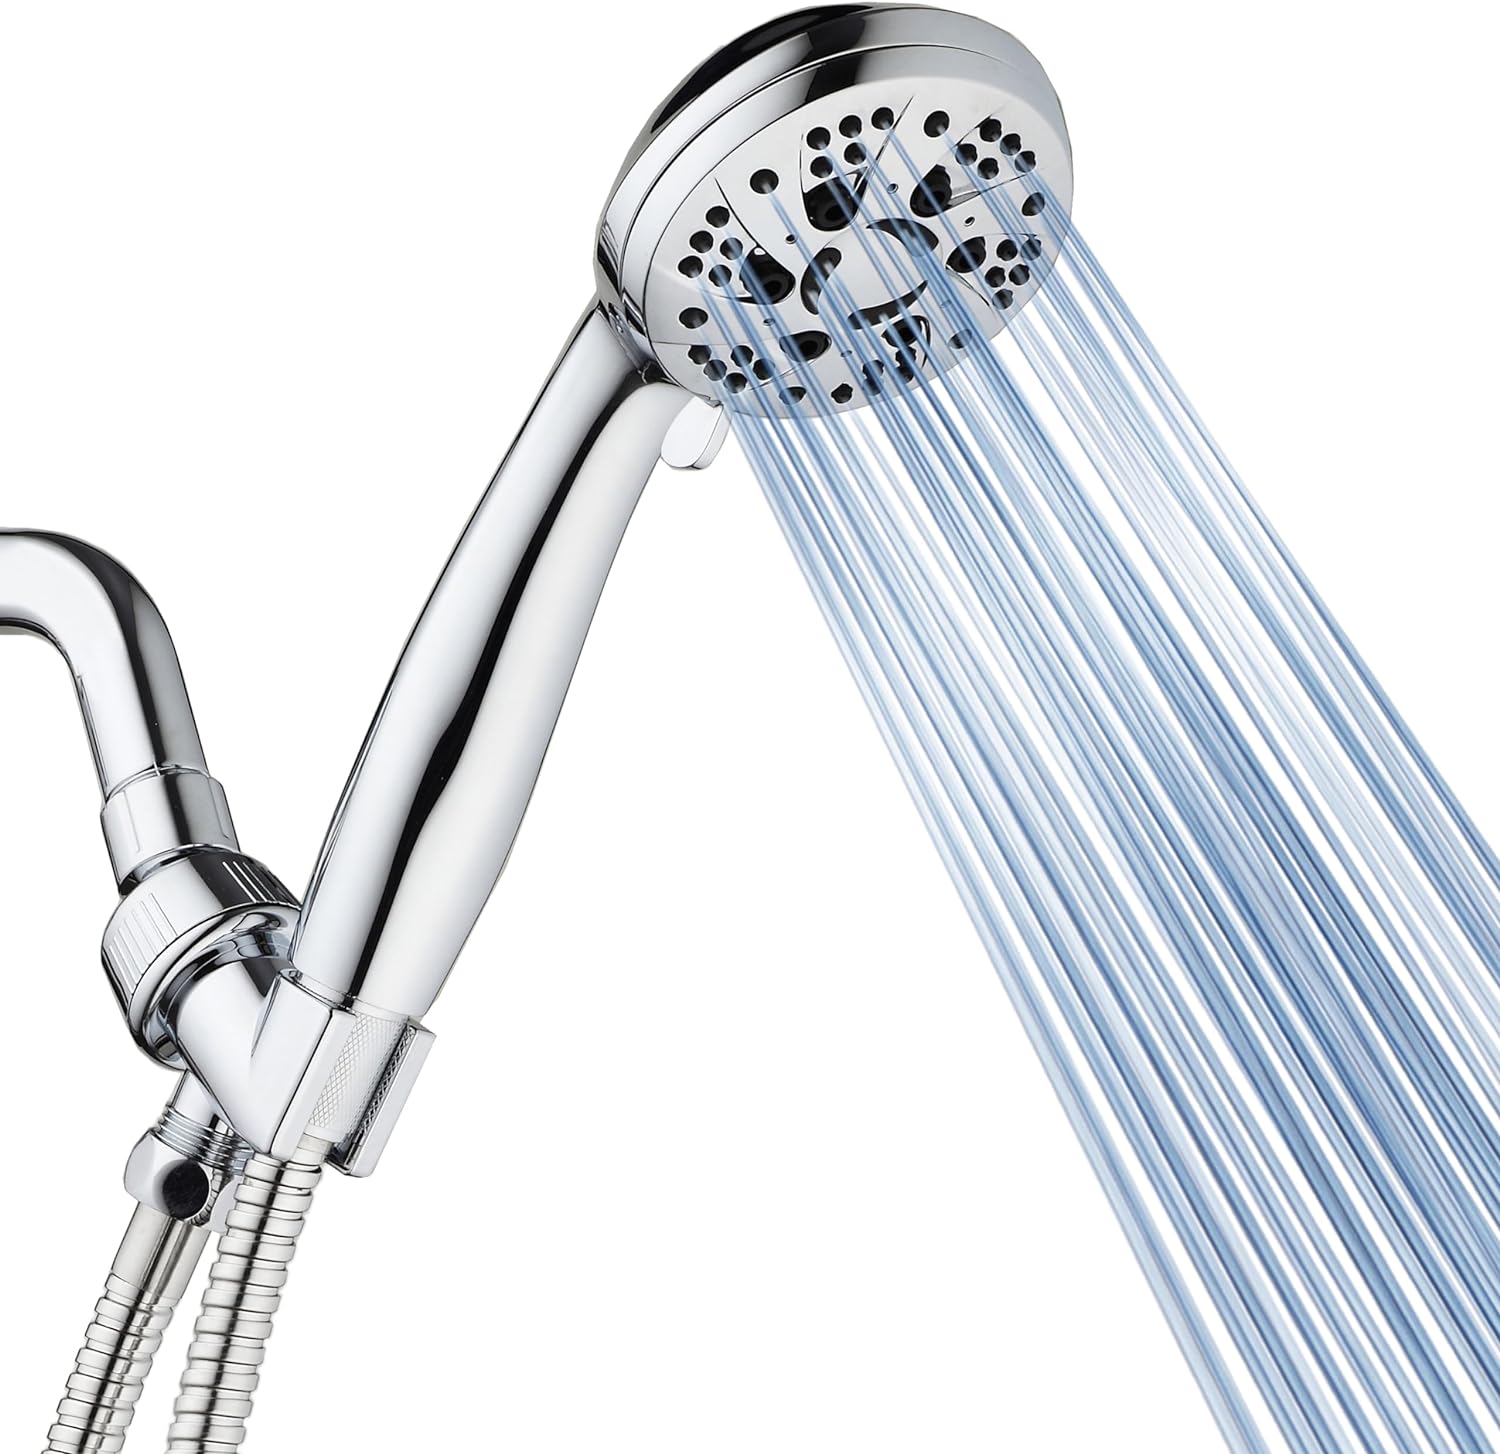 AquaDance High Pressure 6-Setting 3.5 Chrome Face Handheld Shower with Hose for the Ultimate Shower Experience! Officially Independently Tested to Meet Strict US Quality & Performance Standards!